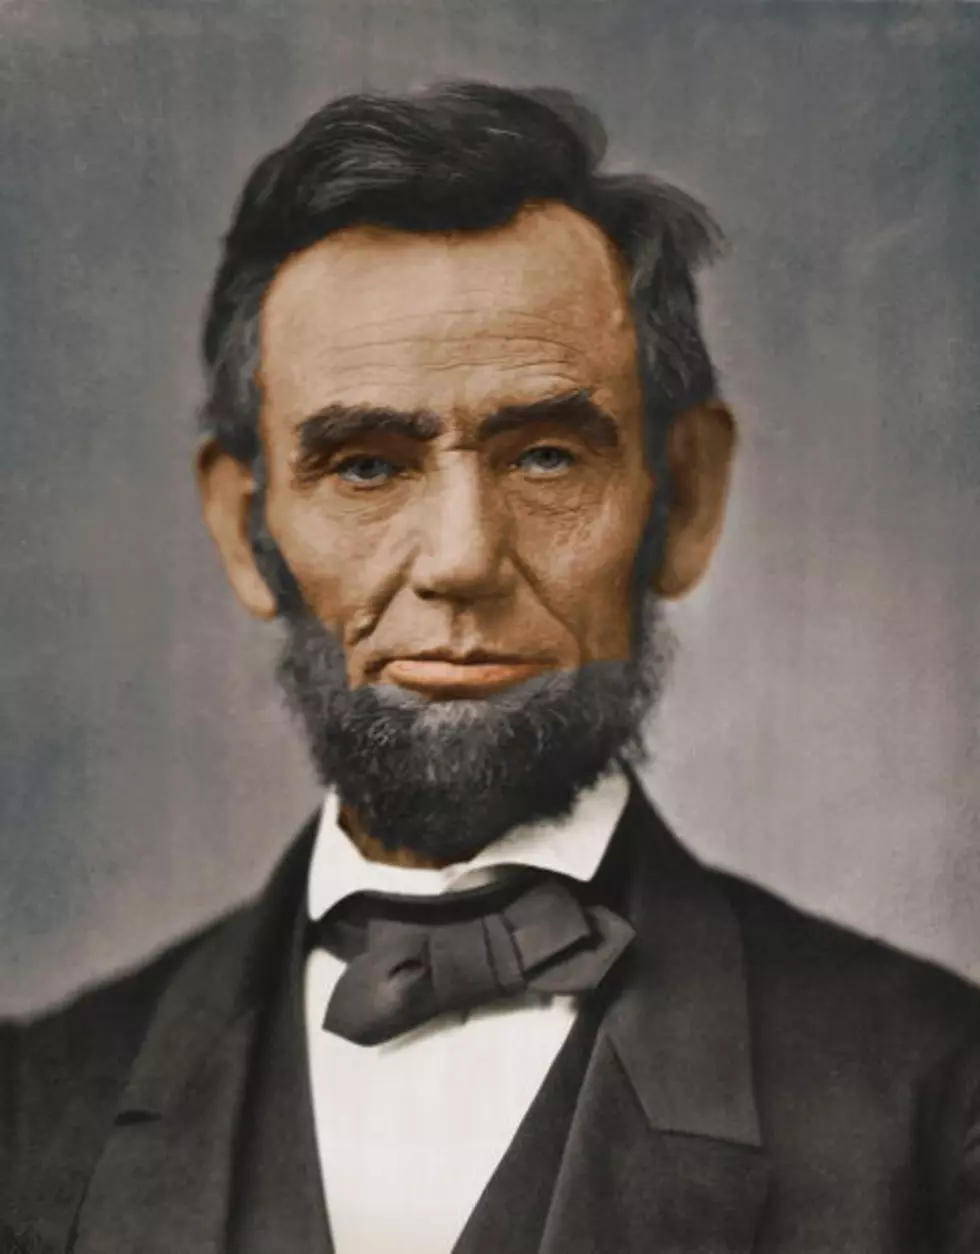 IllinoisTop200 Voters Say Abraham Lincoln is Top Leader